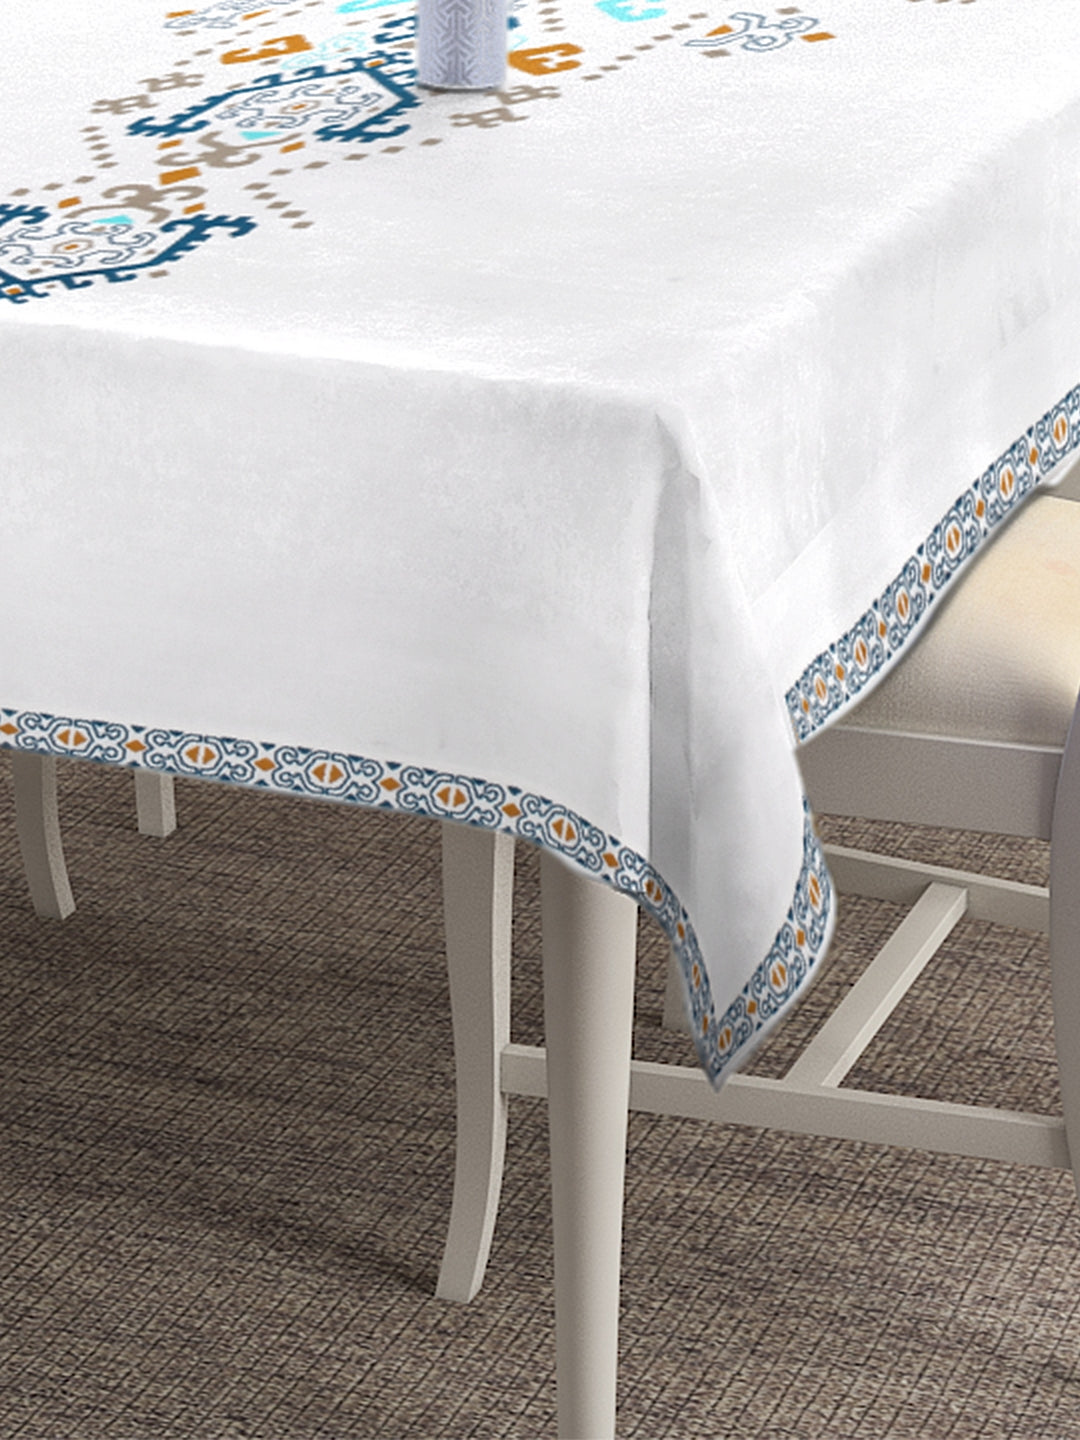 Hill Tribe Printed Table Cloth